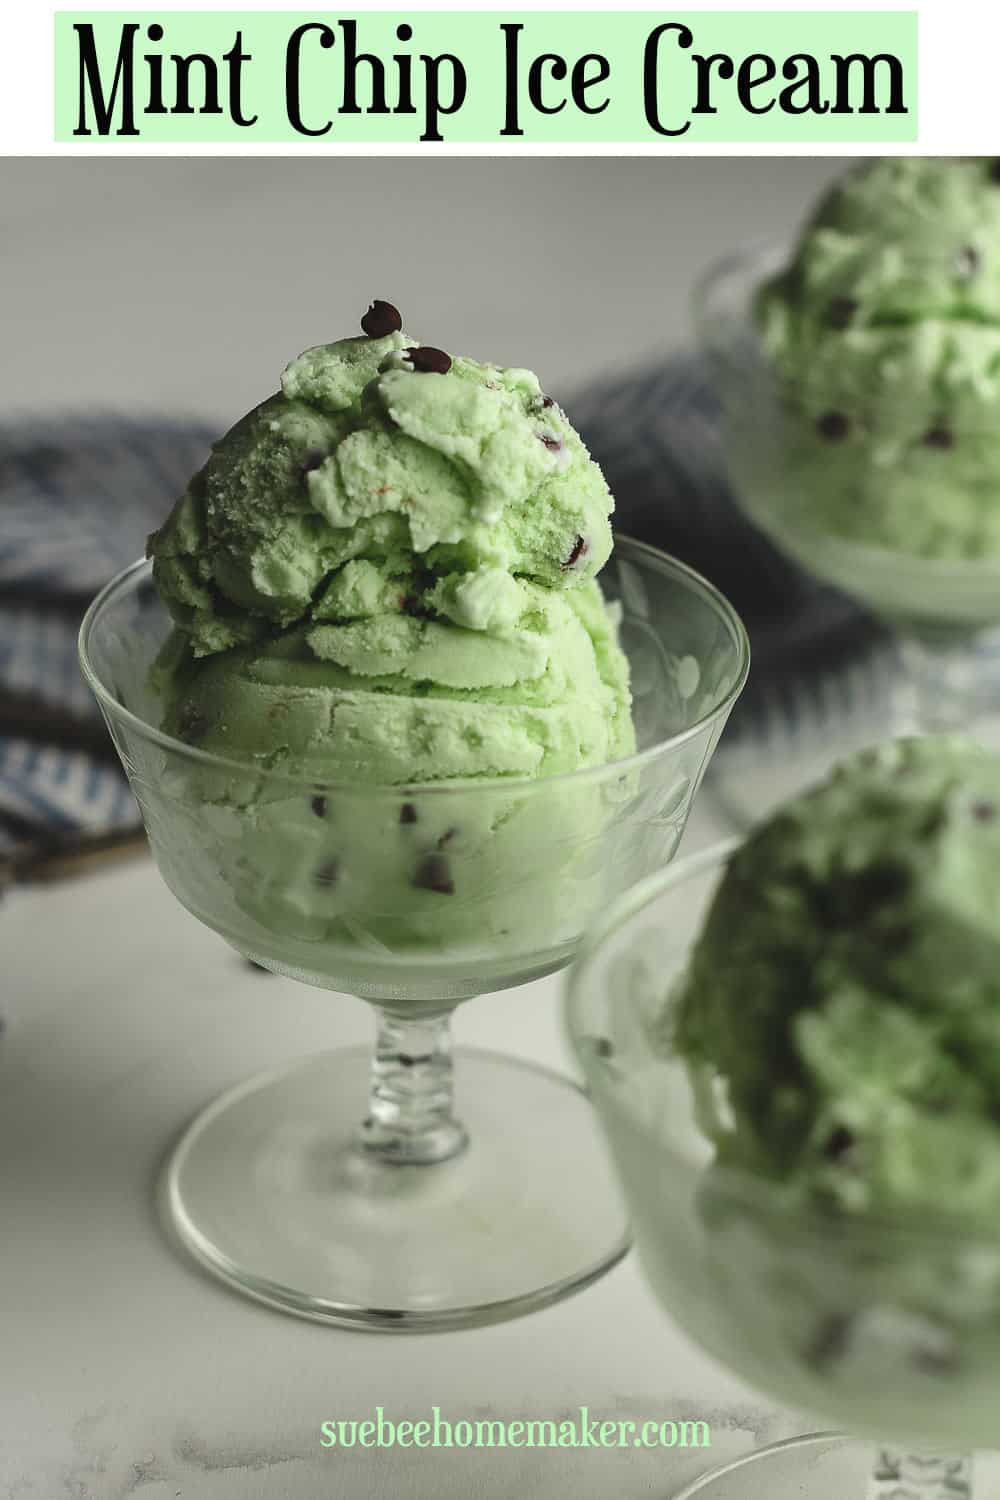 Side shot of some bowls of mint chip ice cream.